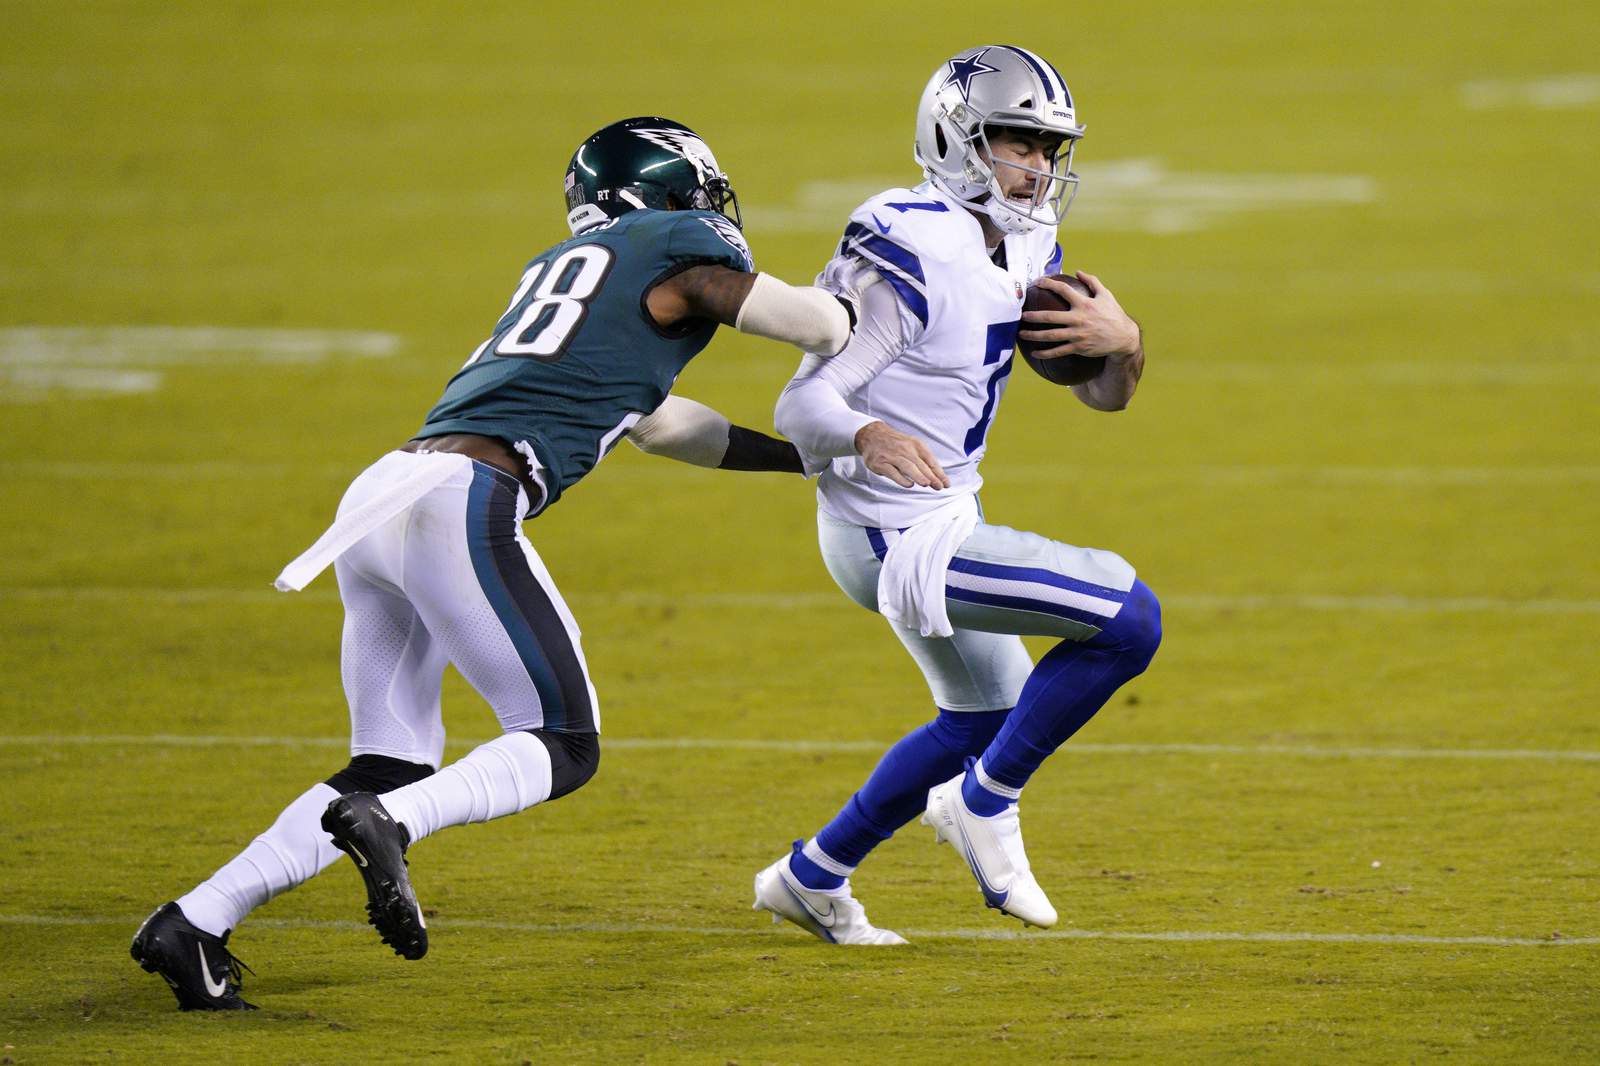 Cowboys try many tricks with rookie QB, fall to Eagles 23-9